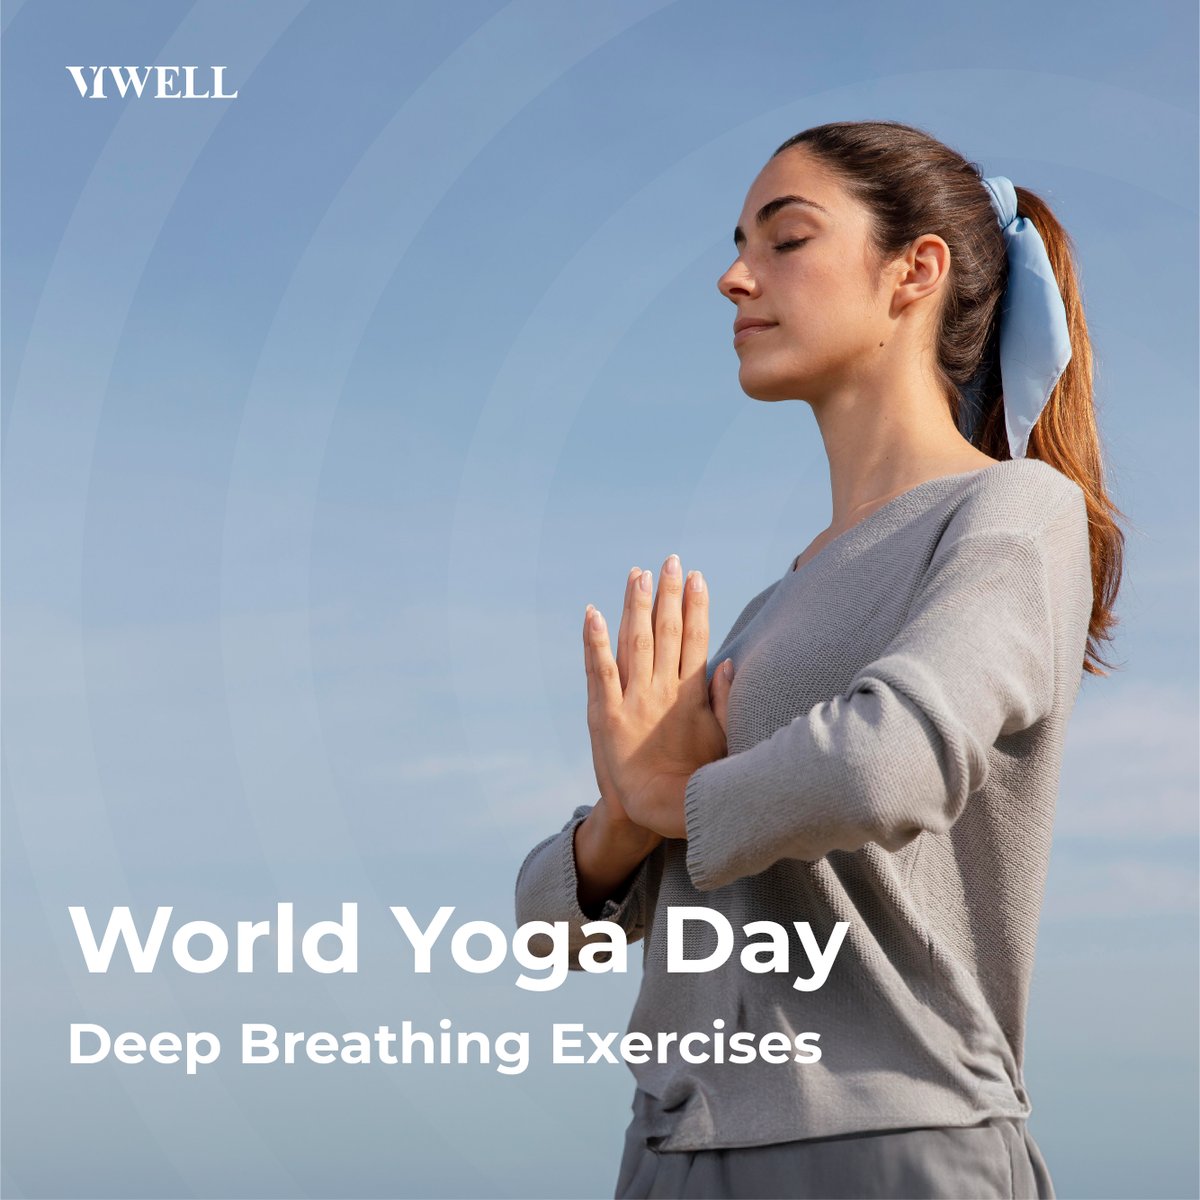 Join us in embracing the power of breath as we celebrate World Yoga Day. Take a moment today to practice deep breathing exercises and experience the transformative effects first-hand. 🧘‍♀️🌍💫

#Worldyogaday #yoga #Yogaday #breathing #Deepbreathing